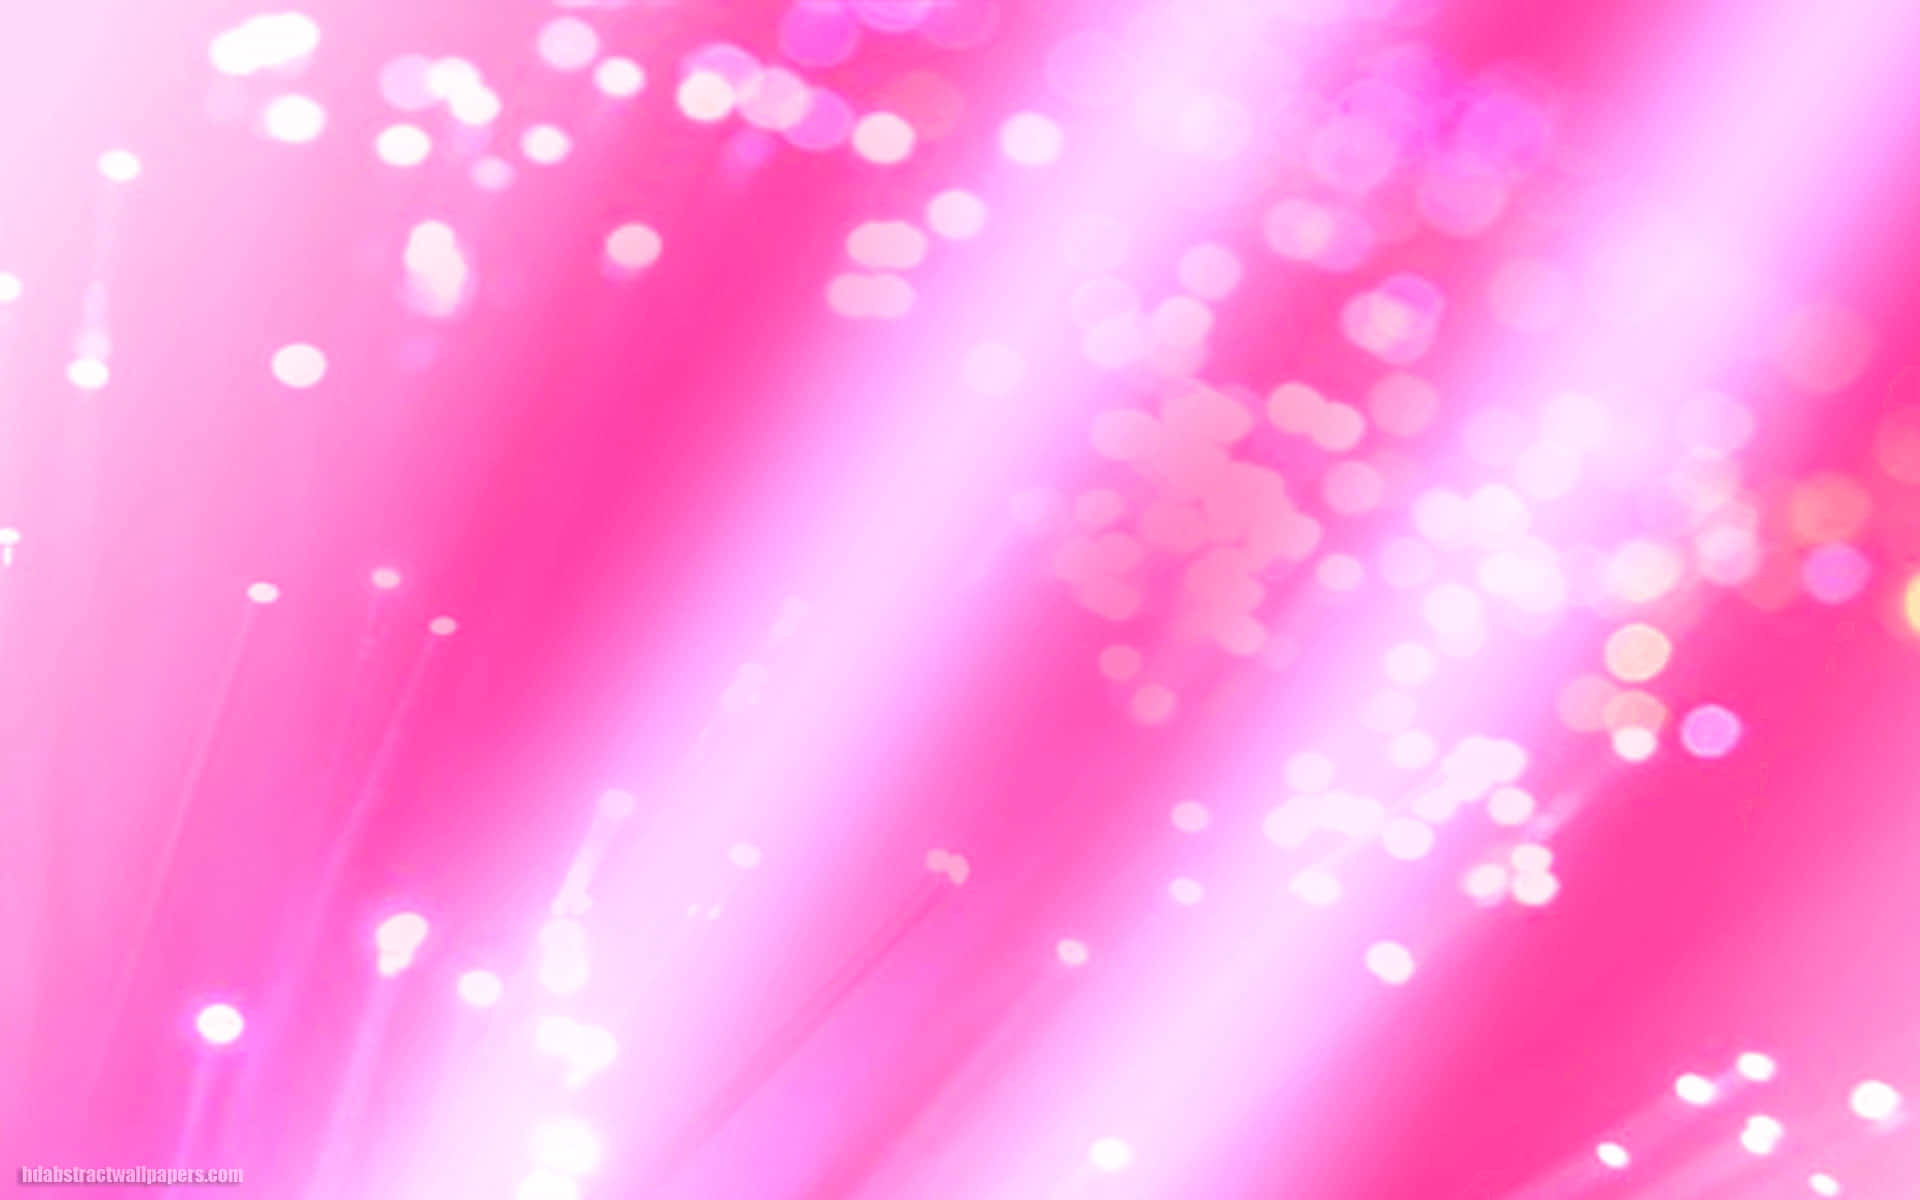 Bokeh Pink Abstract Background Wallpaper Stock Photo  Image of bubble pink  49627254